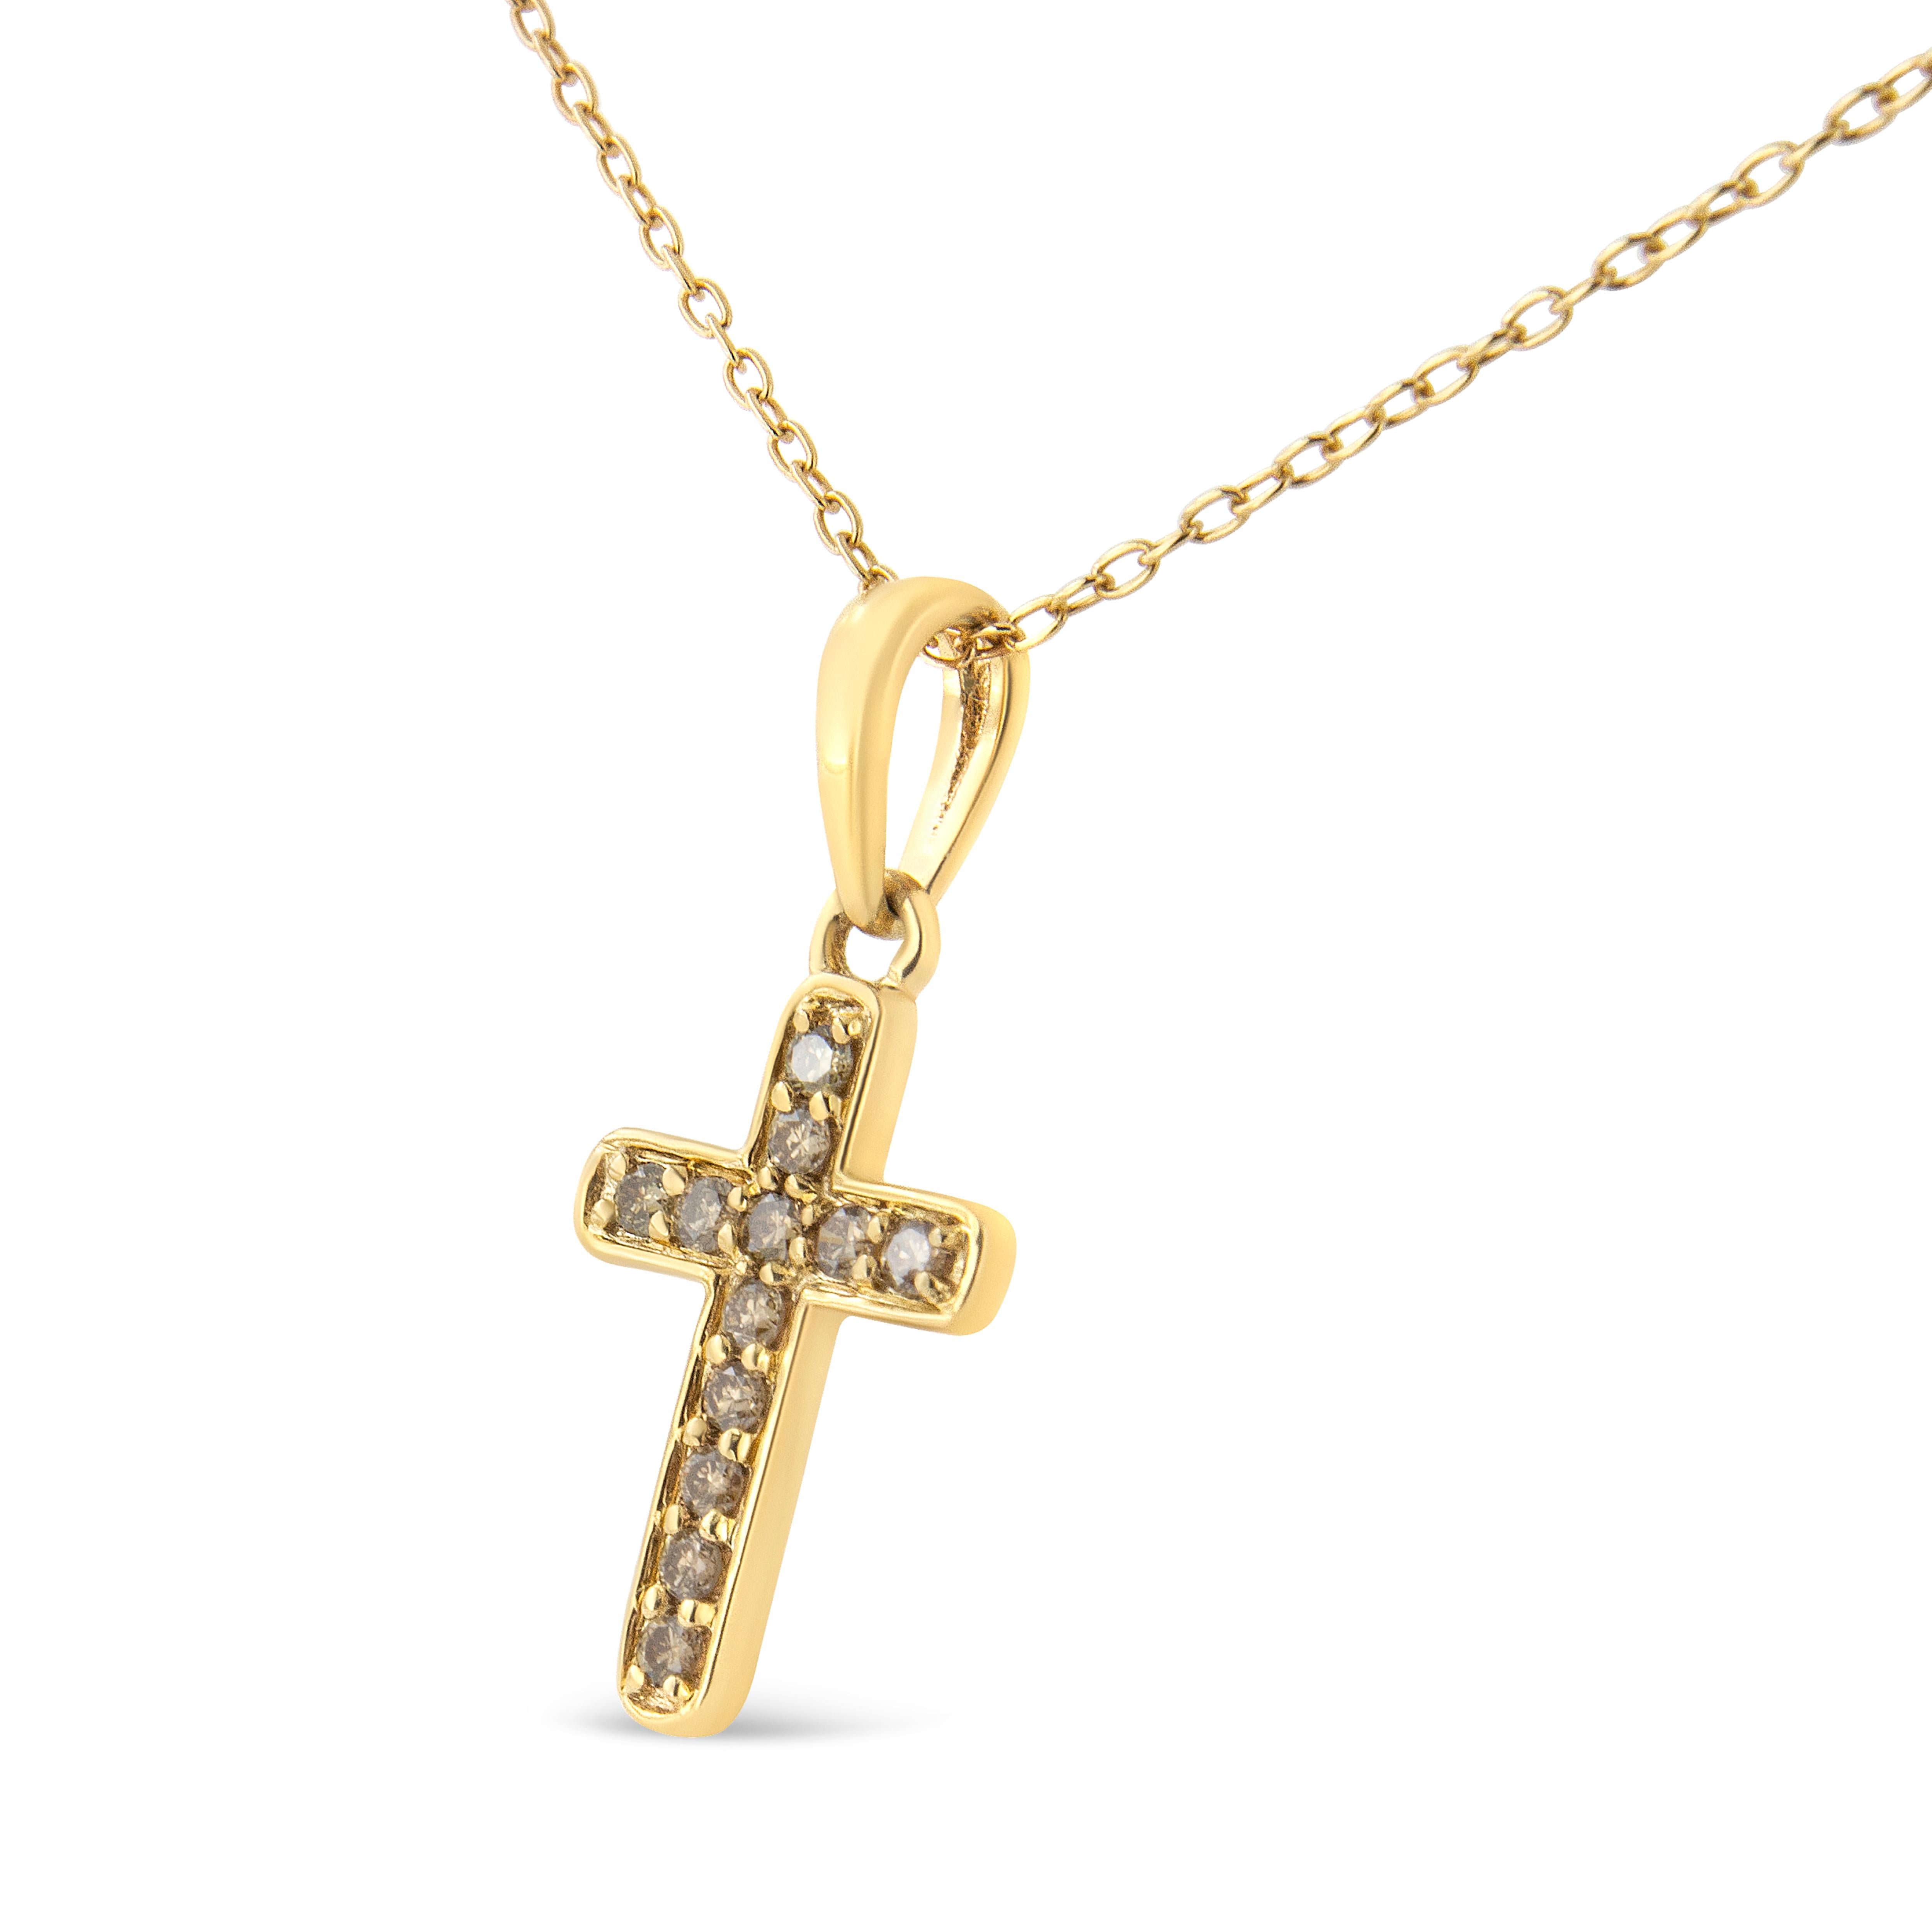 Elevate your faith and adorn yourself in timeless elegance with our exquisite 10kt yellow gold plated 925 sterling silver cross necklace. This pendant isn't just jewelry; it's a statement of devotion and style. Imagine the ethereal beauty of 12